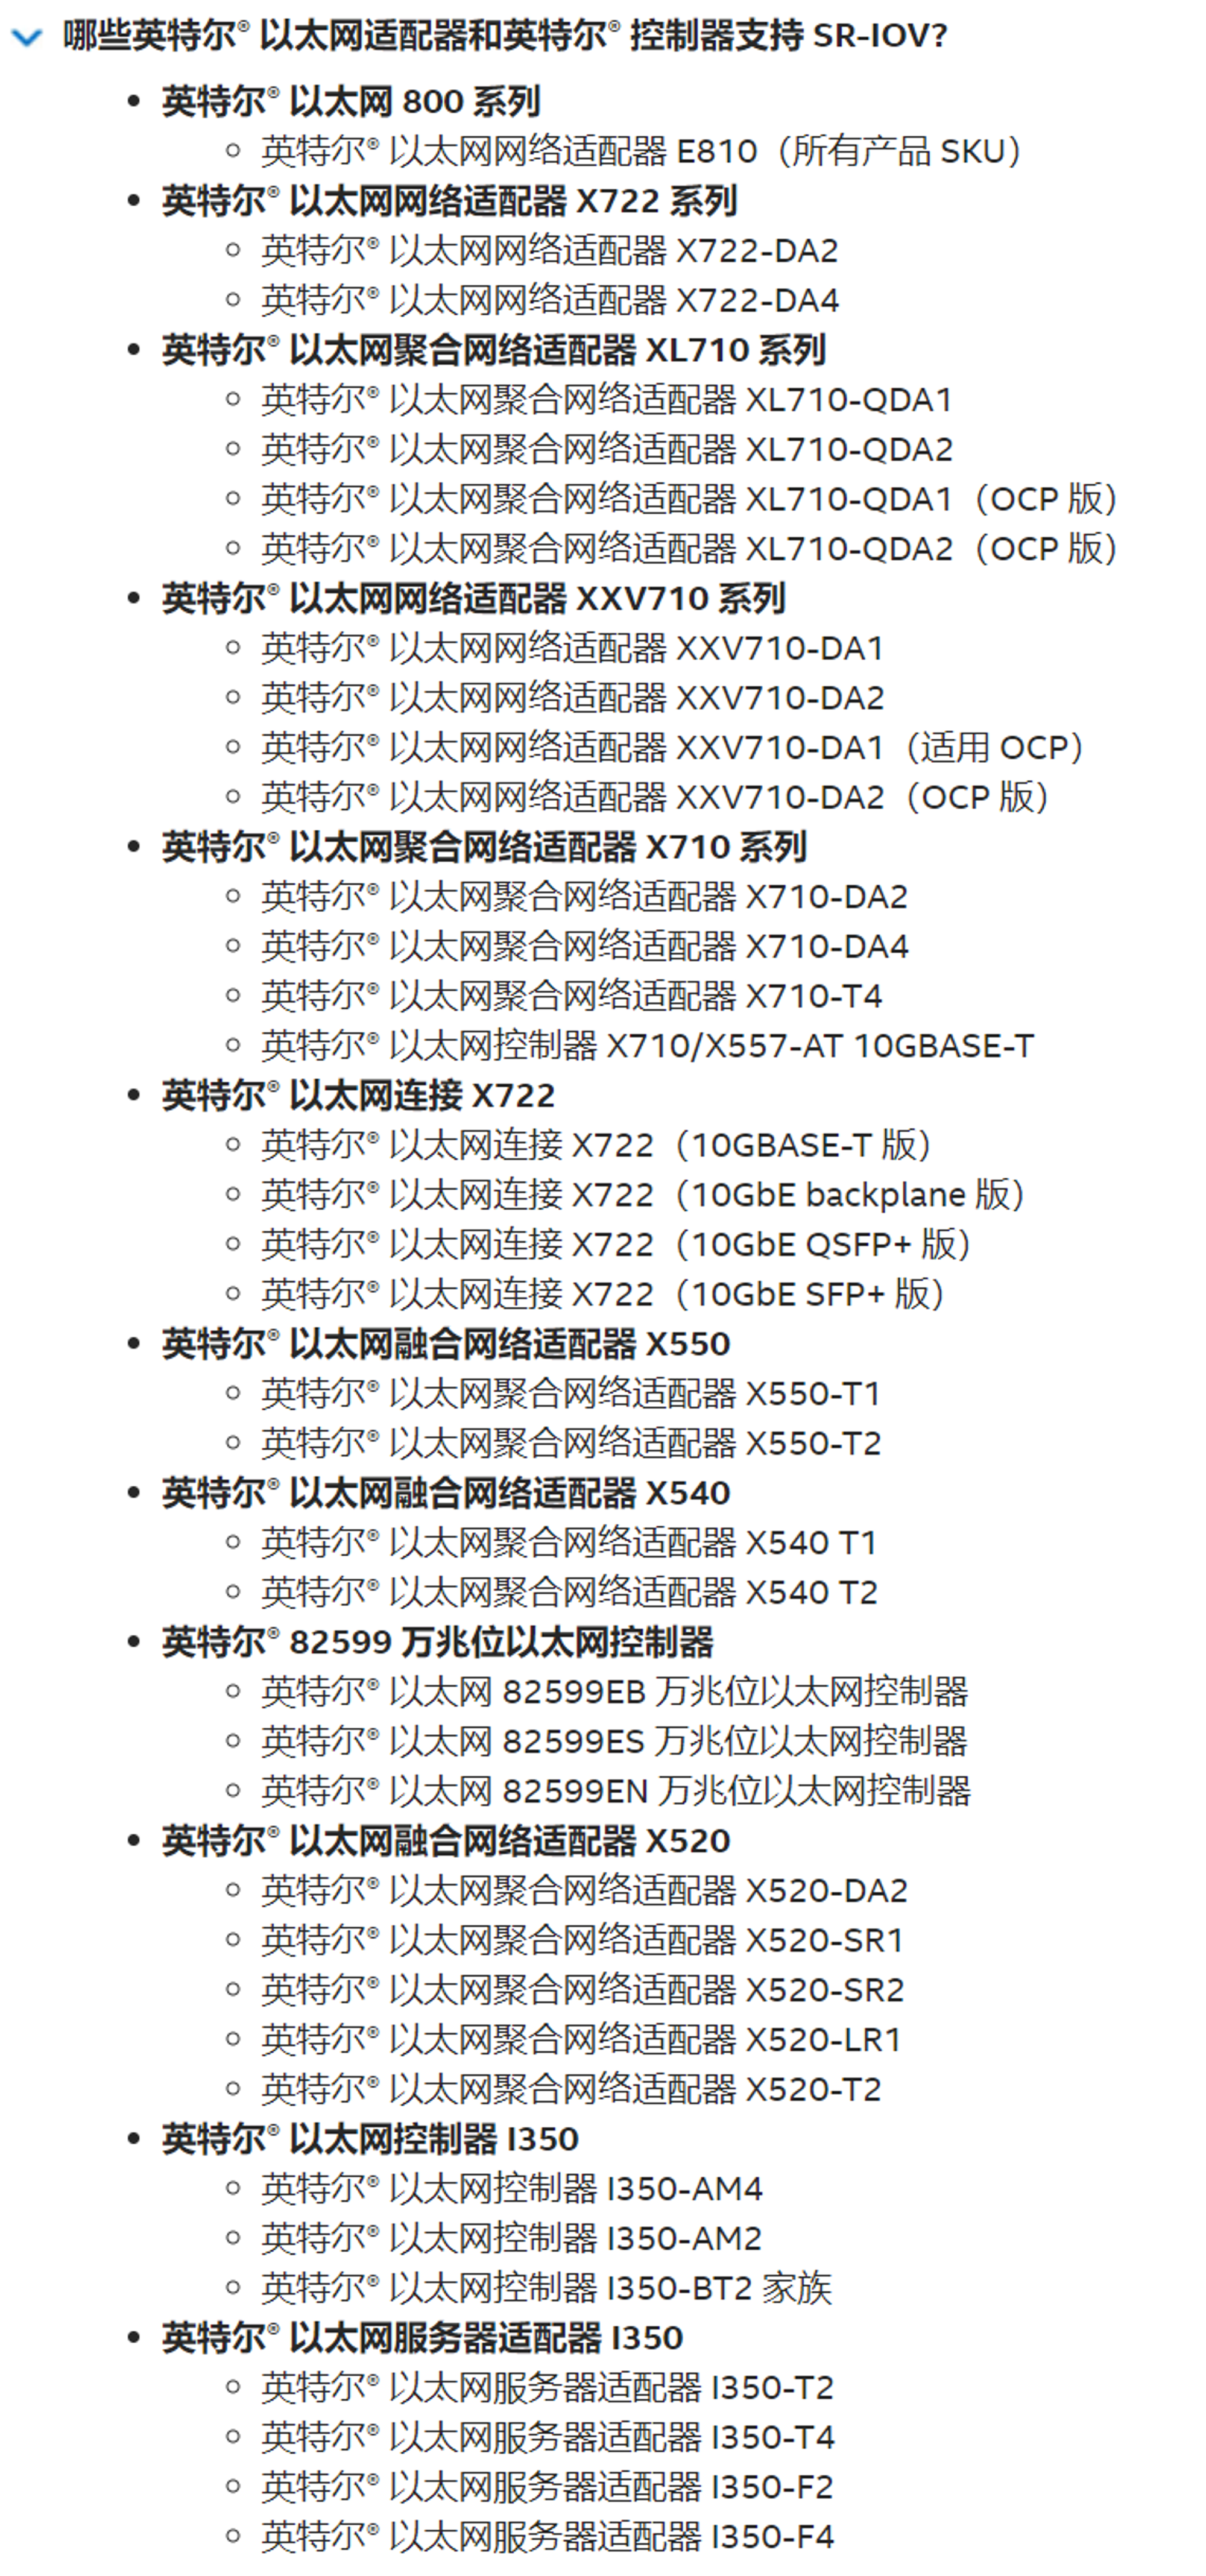 https://www.intel.cn/content/www/cn/zh/support/articles/000005722/ethernet-products.html